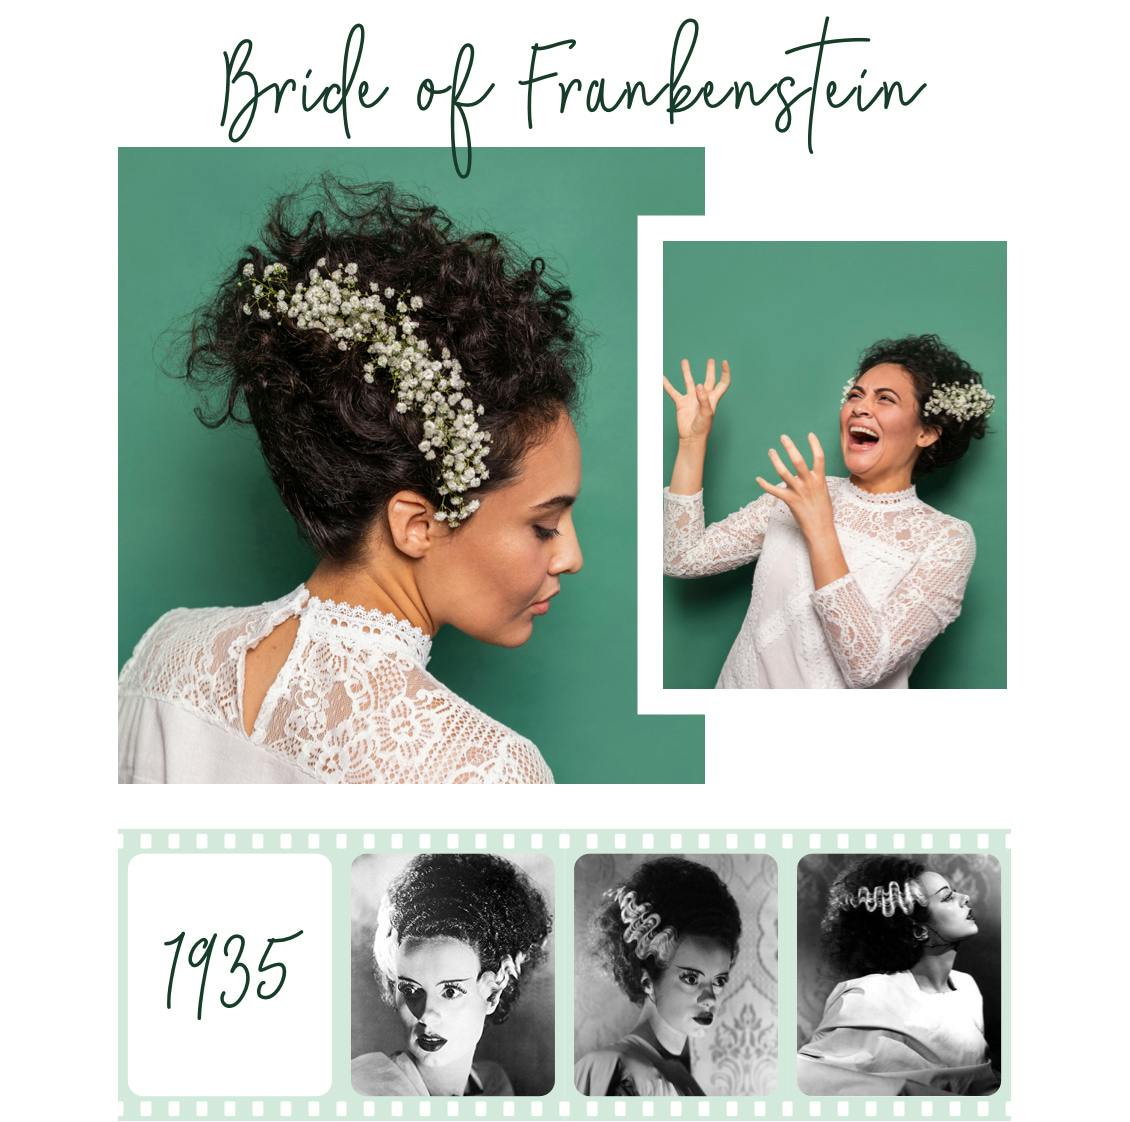 Image of eSalon employee as bride of Frankenstein costume with long curly black hair color as the focus with image below of original look from 1935